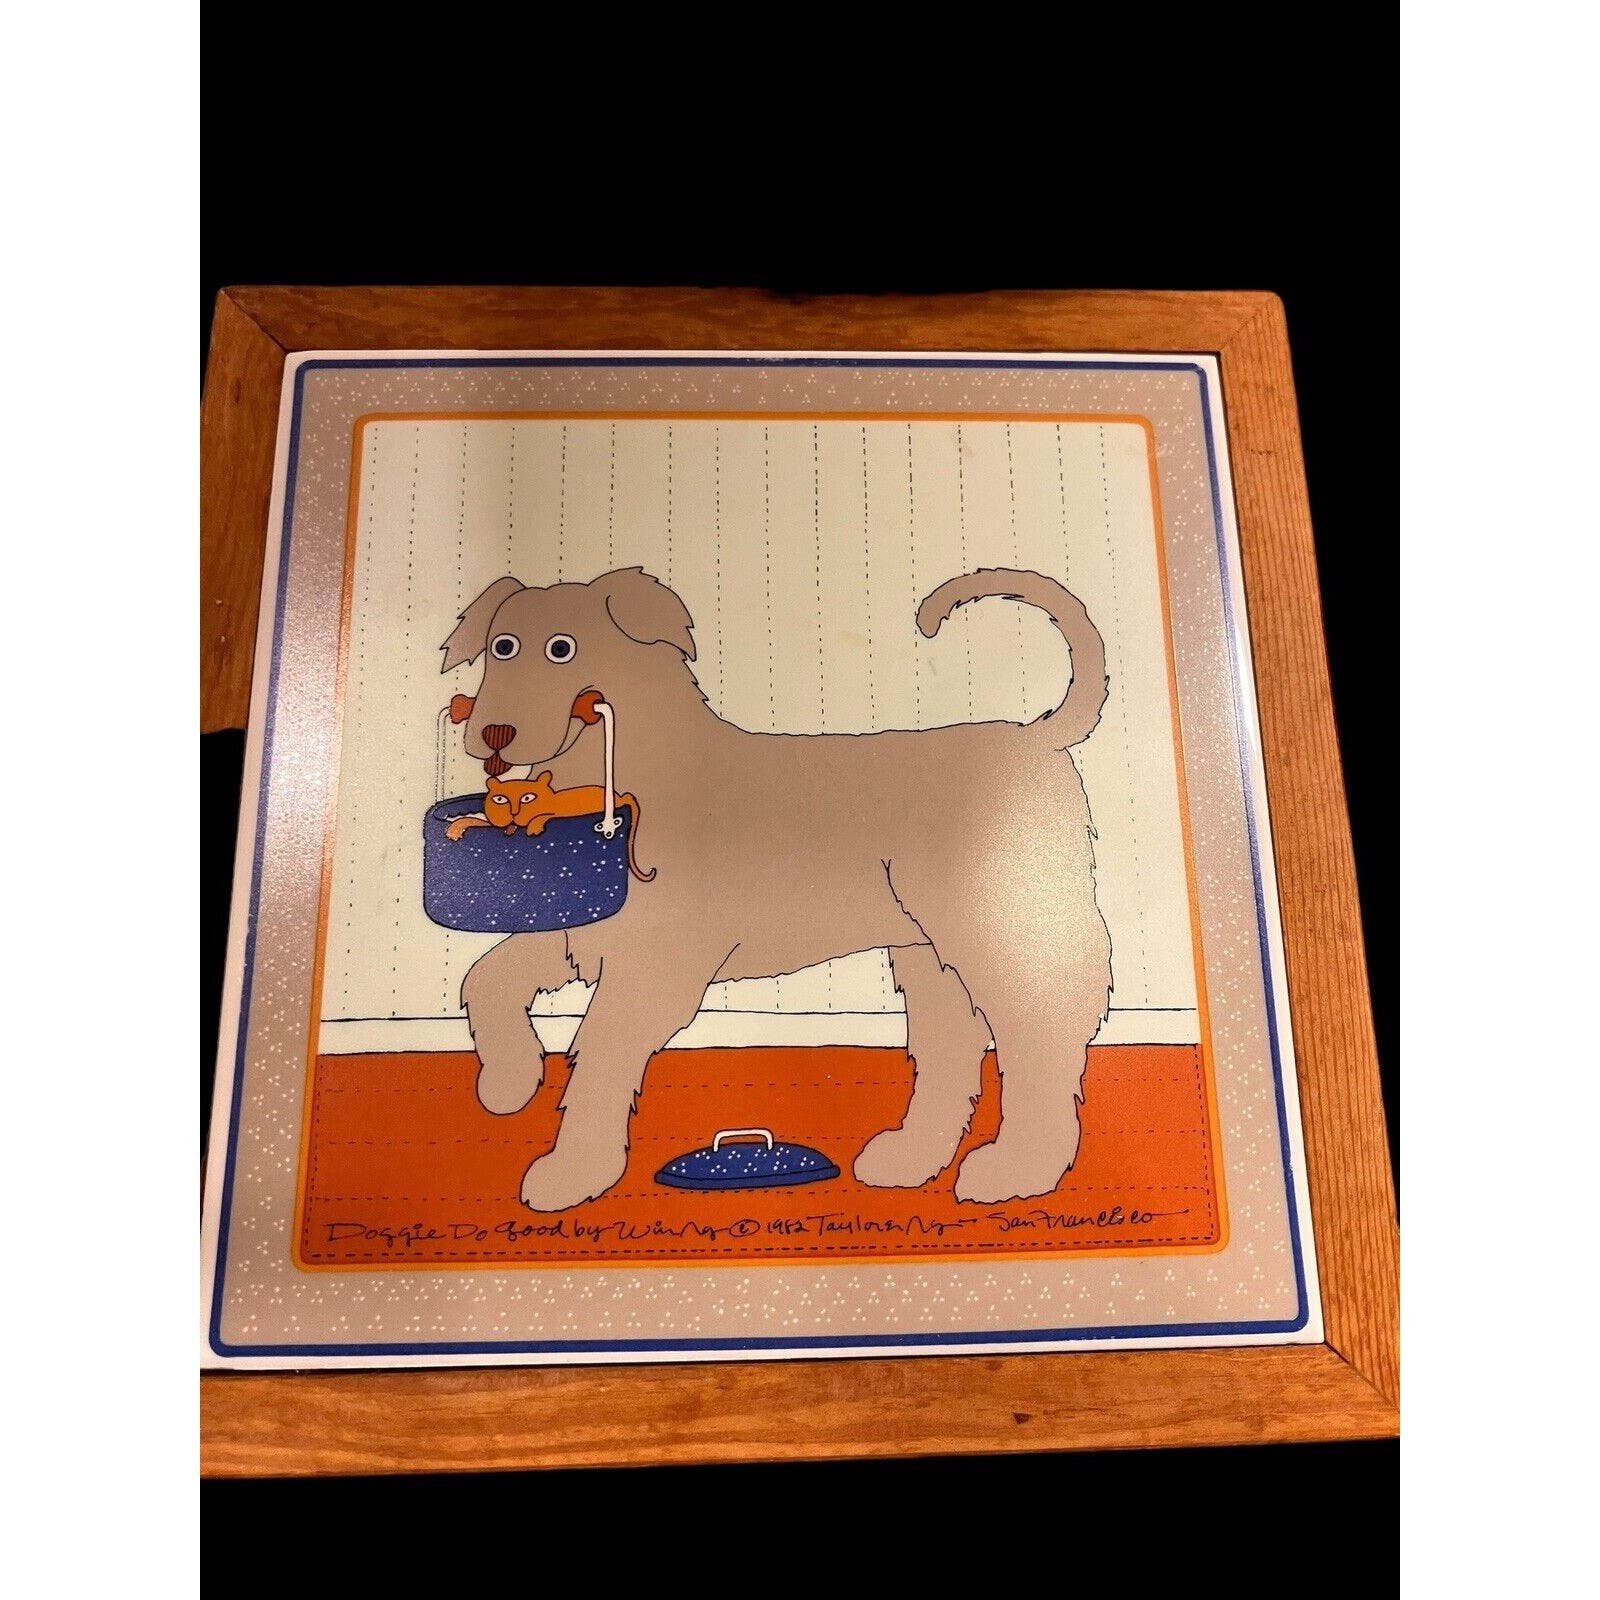 Doggie Do Good Trivet Wall Plaque 1982 Taylor And Ng San Francisco Sign Tile lePXEj6IT